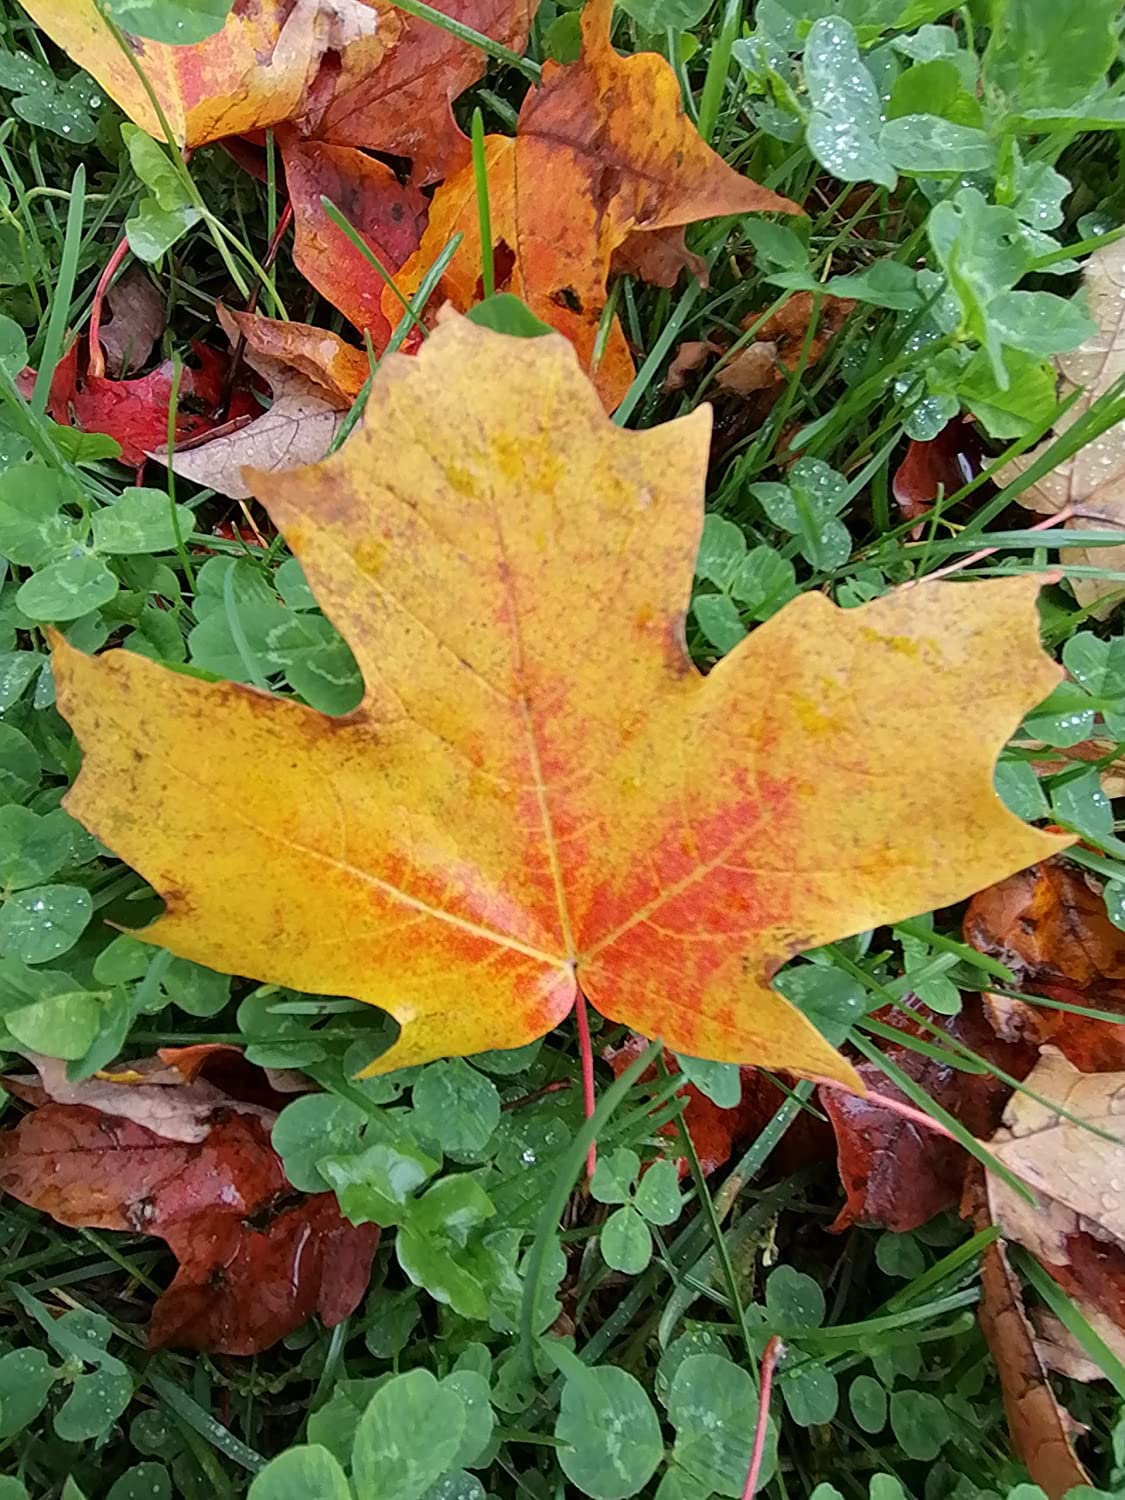 Sugar Maple 10 Tree Seeds Ontario Grown - Acer Saccharum Hard Maple Canada Native Source of Maple Syrup